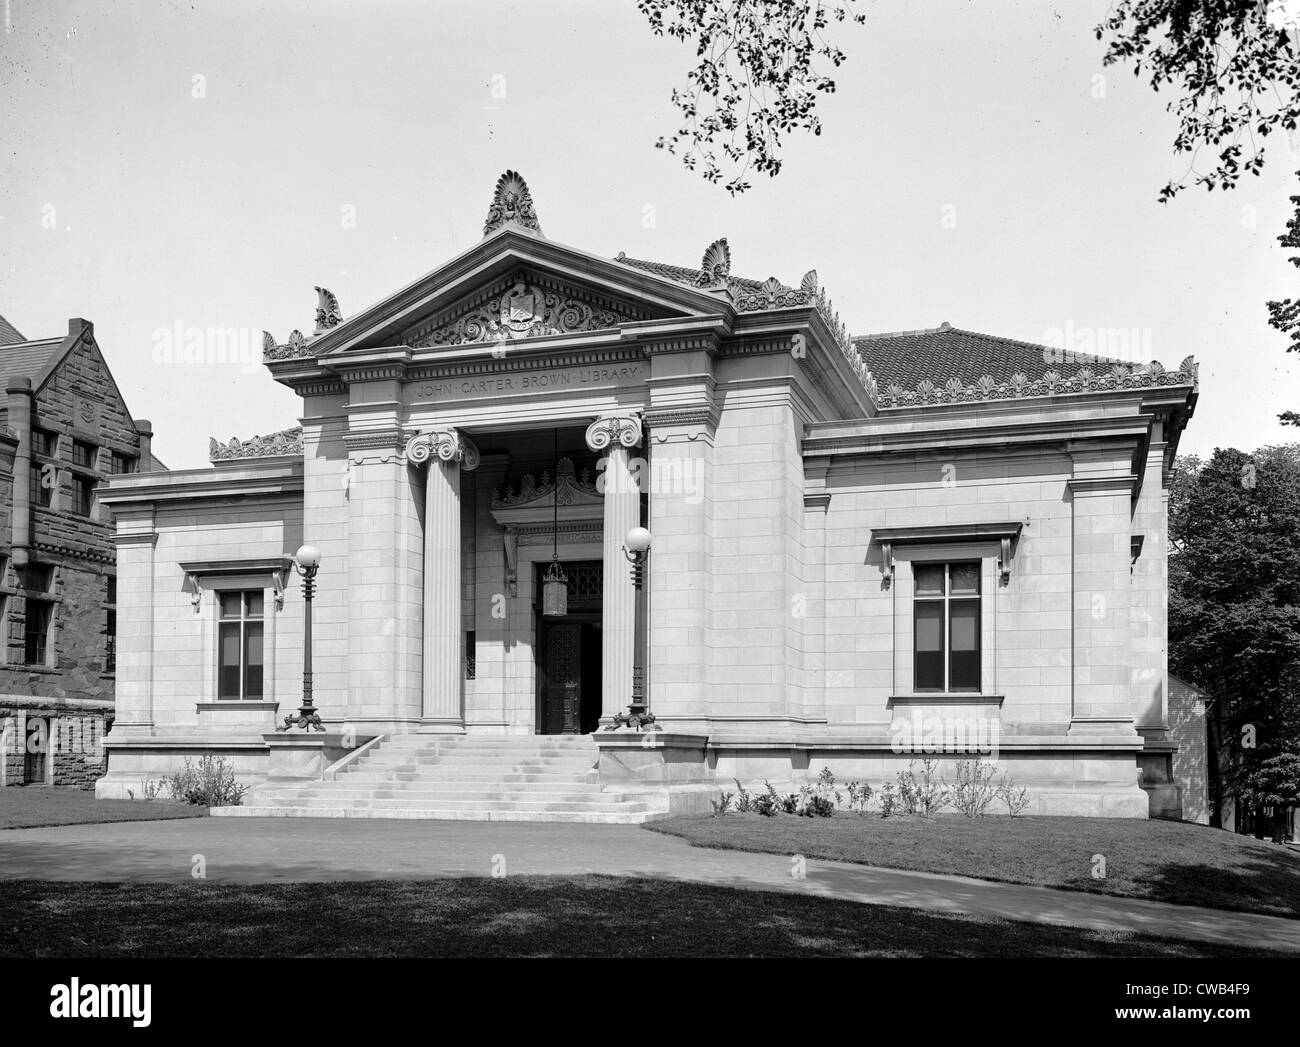 John Carter Brown Library, Brown University, Providence, R.I. ca. 1906 Banque D'Images